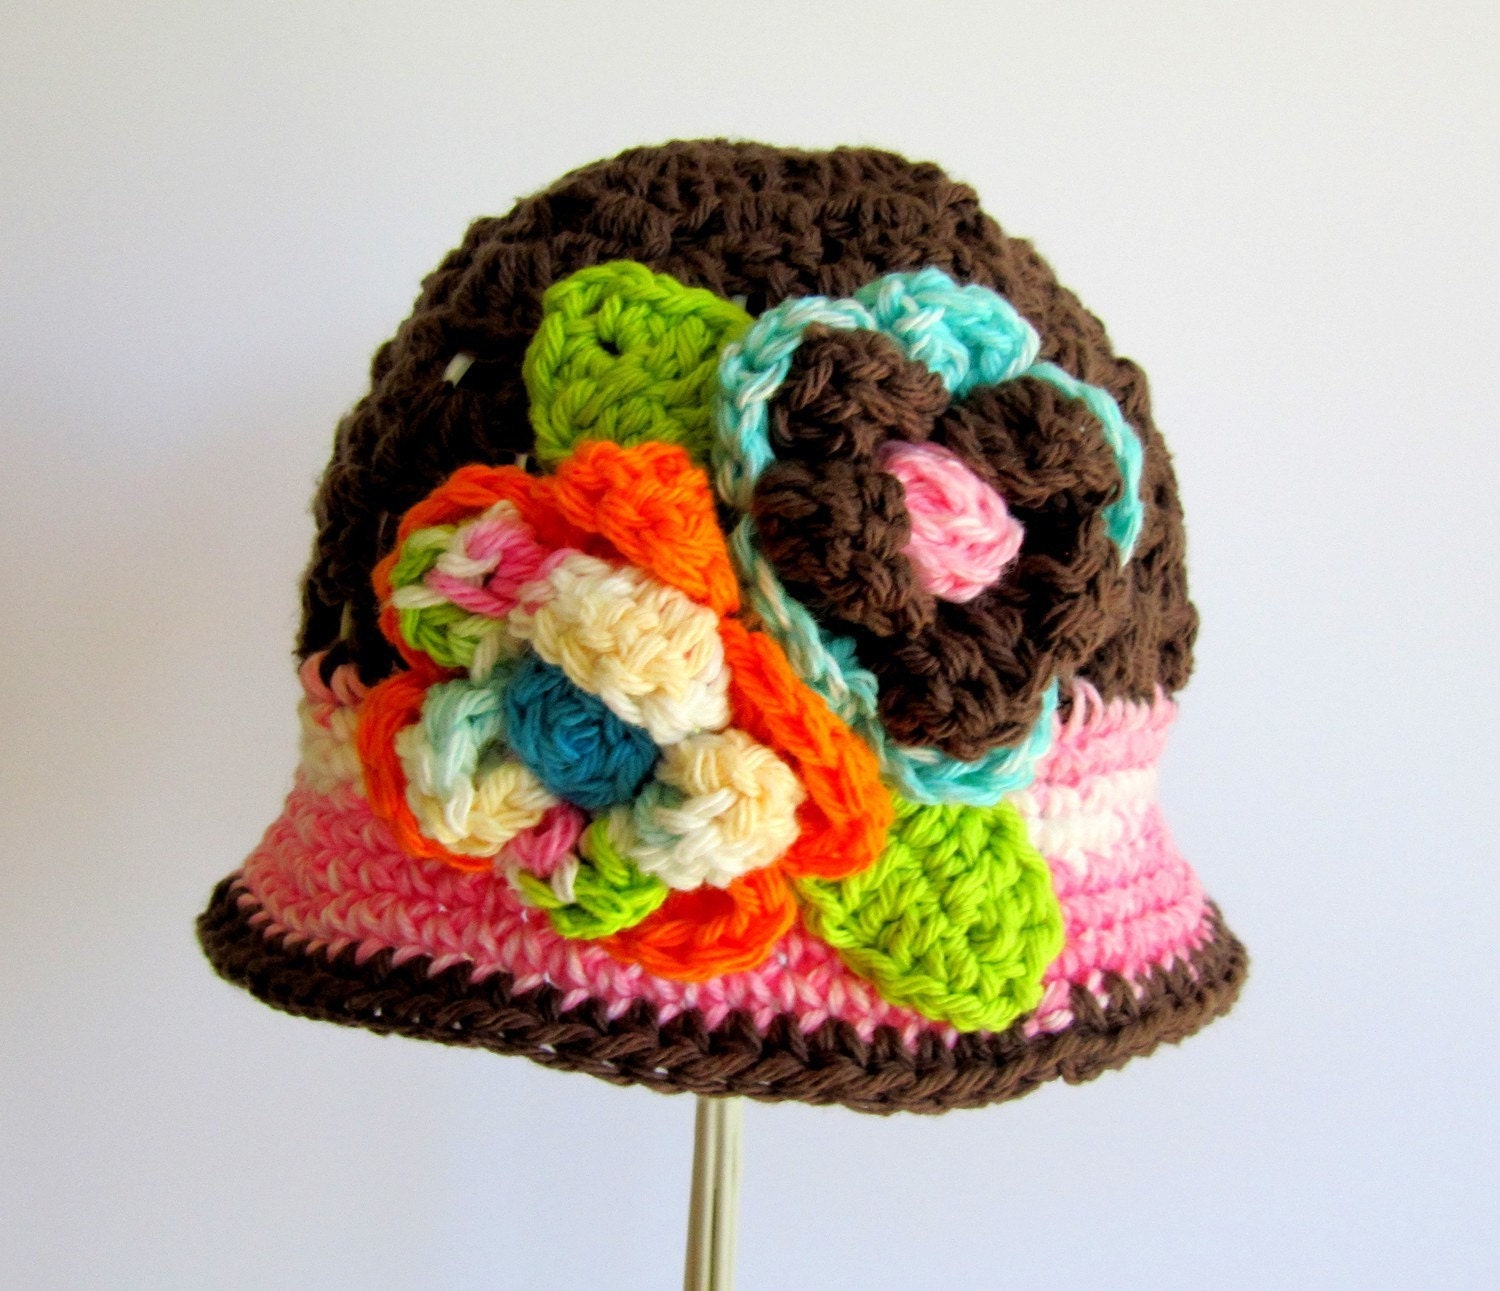 CHOCOLATE PINK CROCHET CLOCHE FLOWER HAT - ANY SIZE